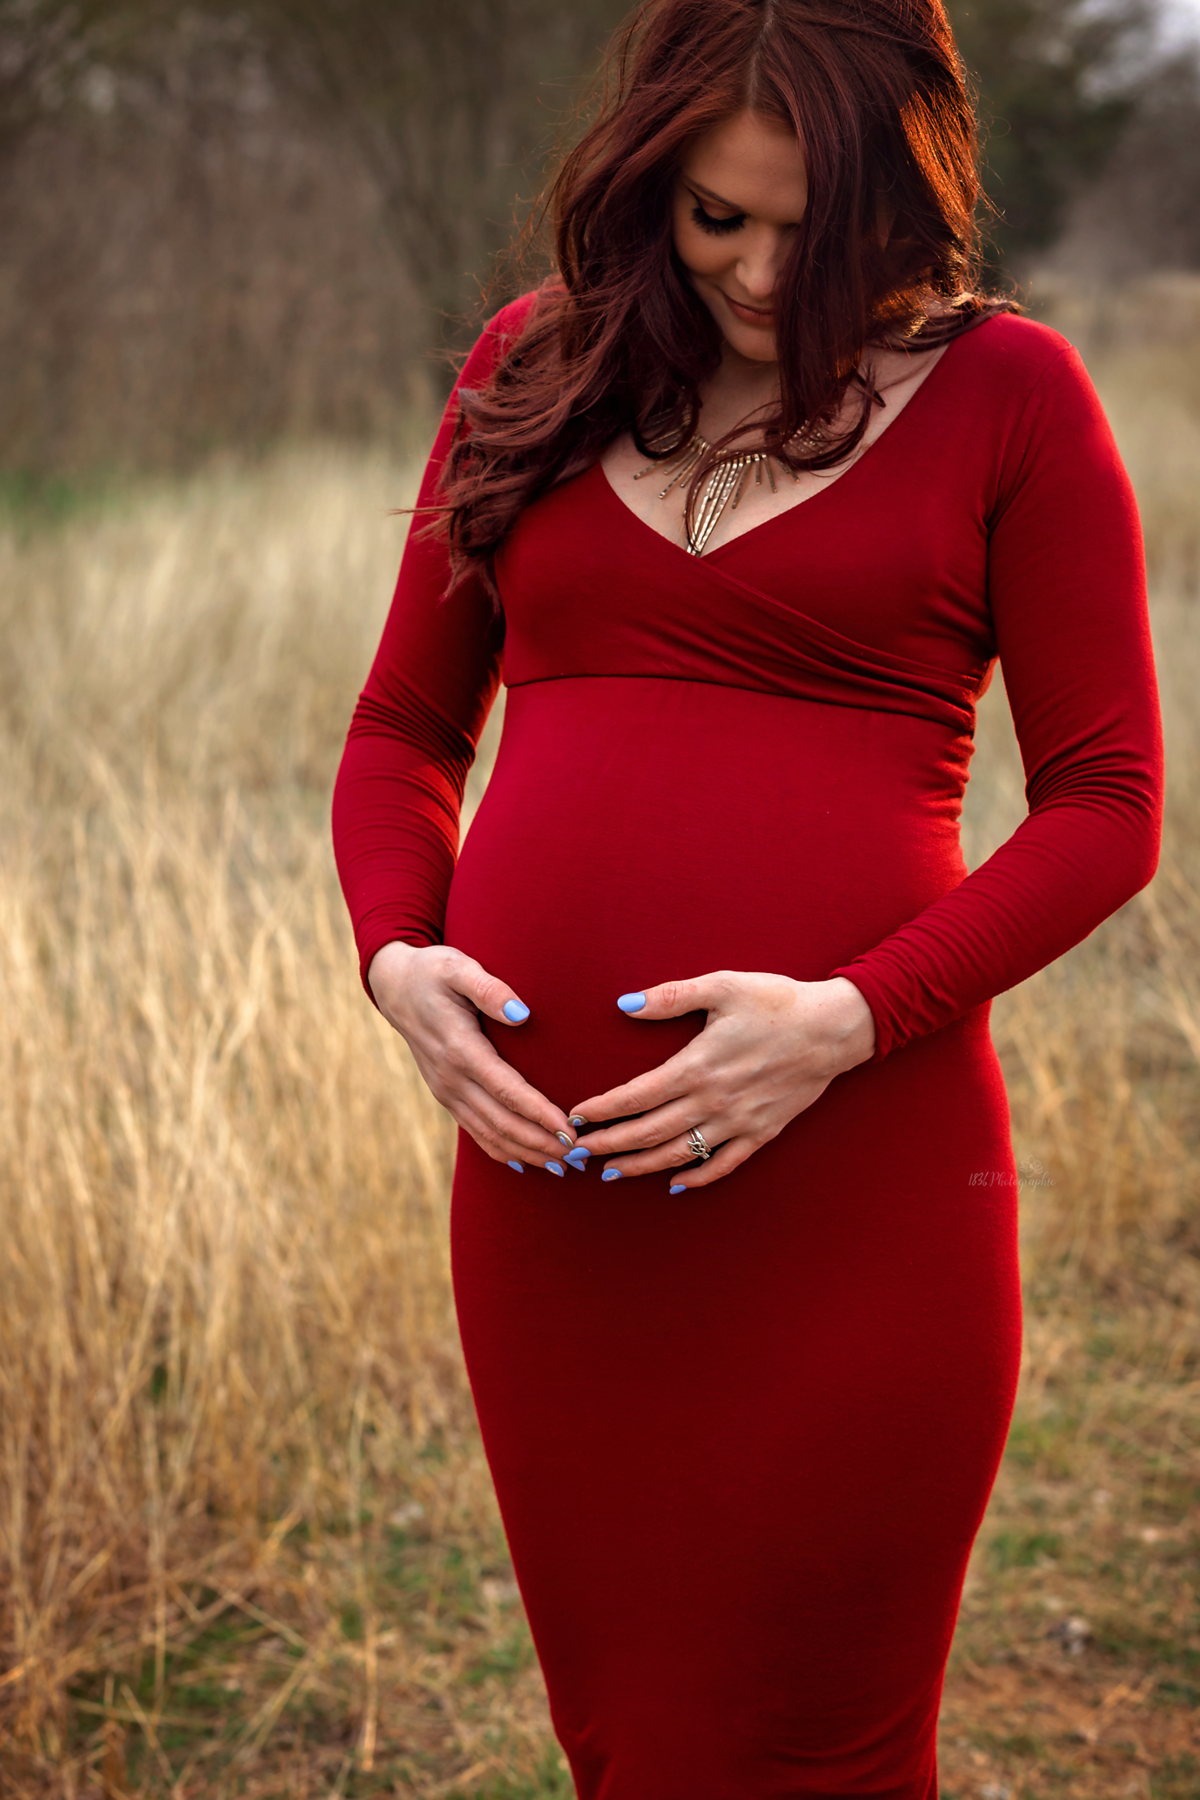 Discover chic elegance in a styled maternity session near San Antonio. Our mom-to-be, in a scarlet flying dress, adds a touch of sophistication to your family's winter portraits.